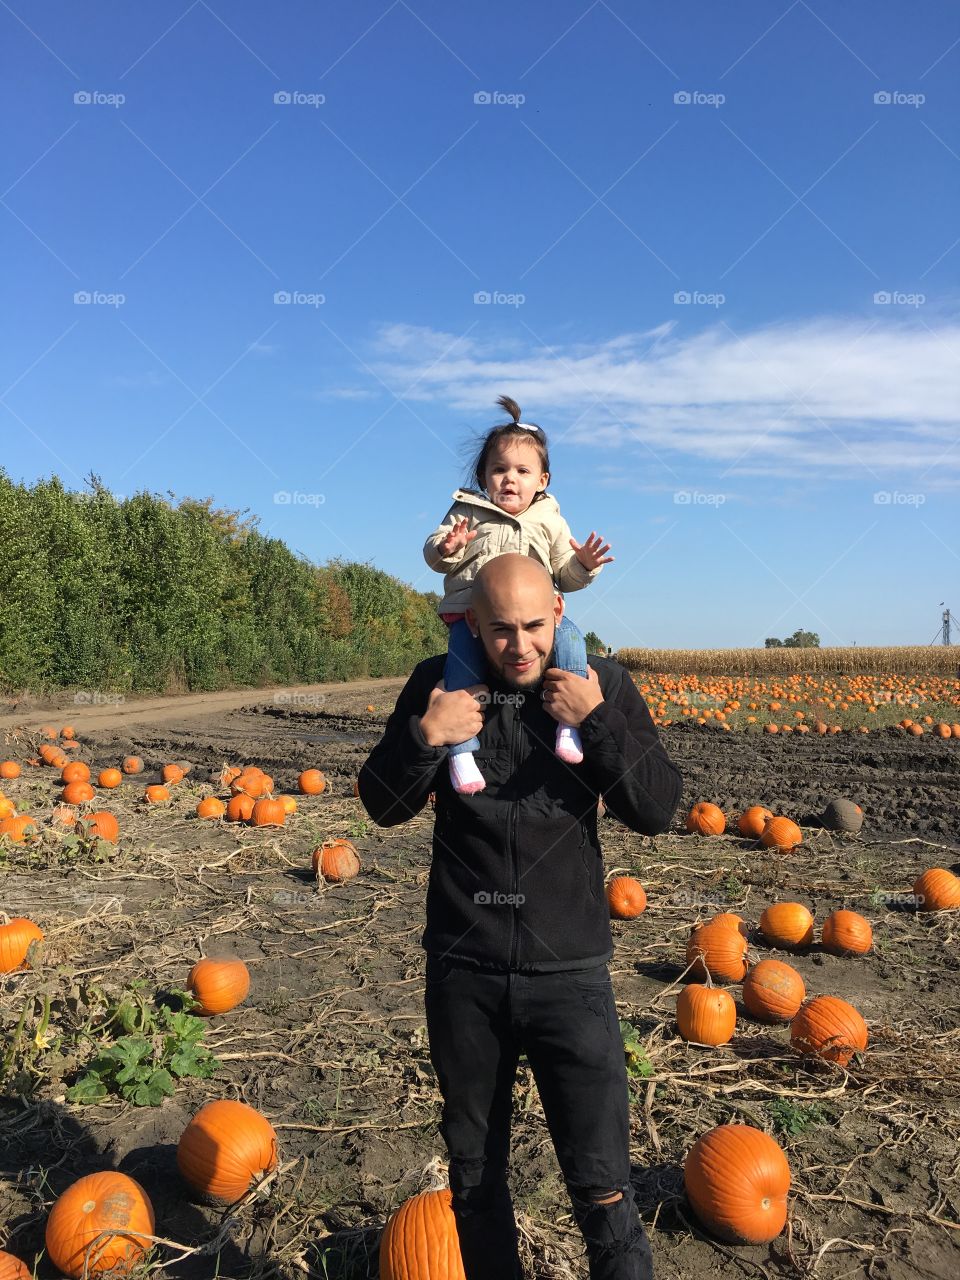 Pumpkin patch father daughter fun! When the sunshine doesn't shine, I still have you.